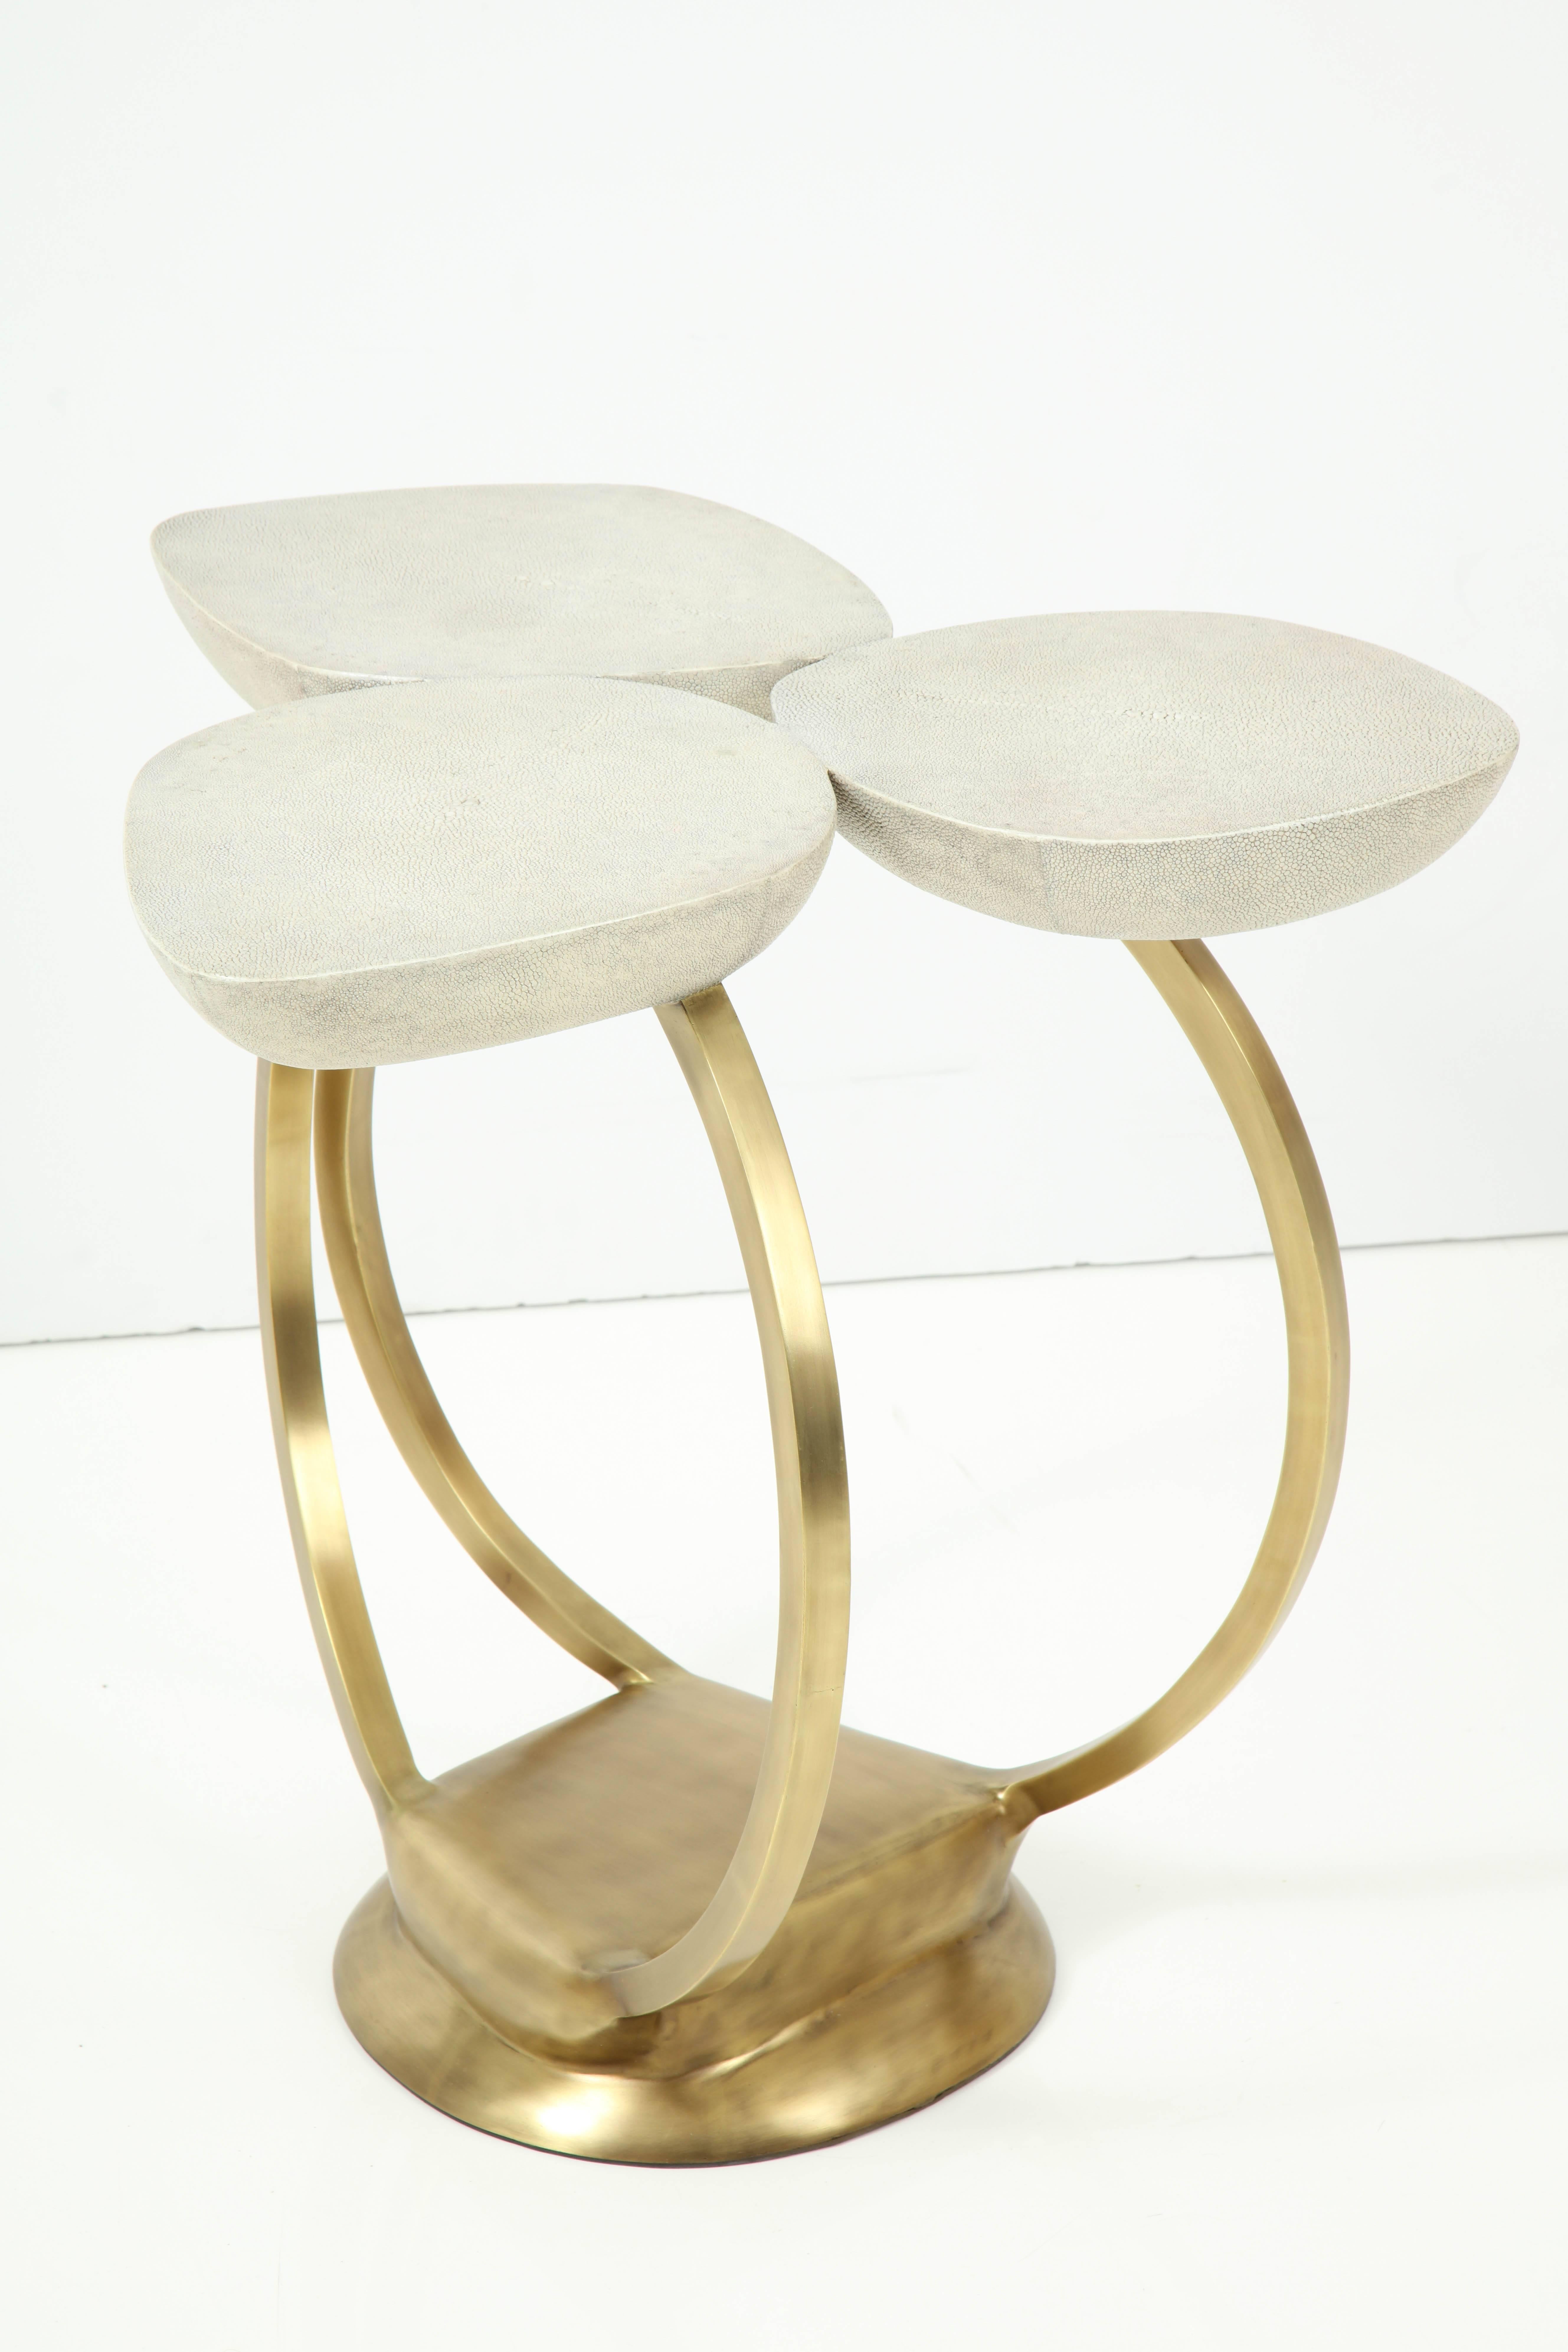 Hand-Crafted Shagreen Side Table with Brass Base, Cream Shagreen, Contemporary, Floral Design For Sale